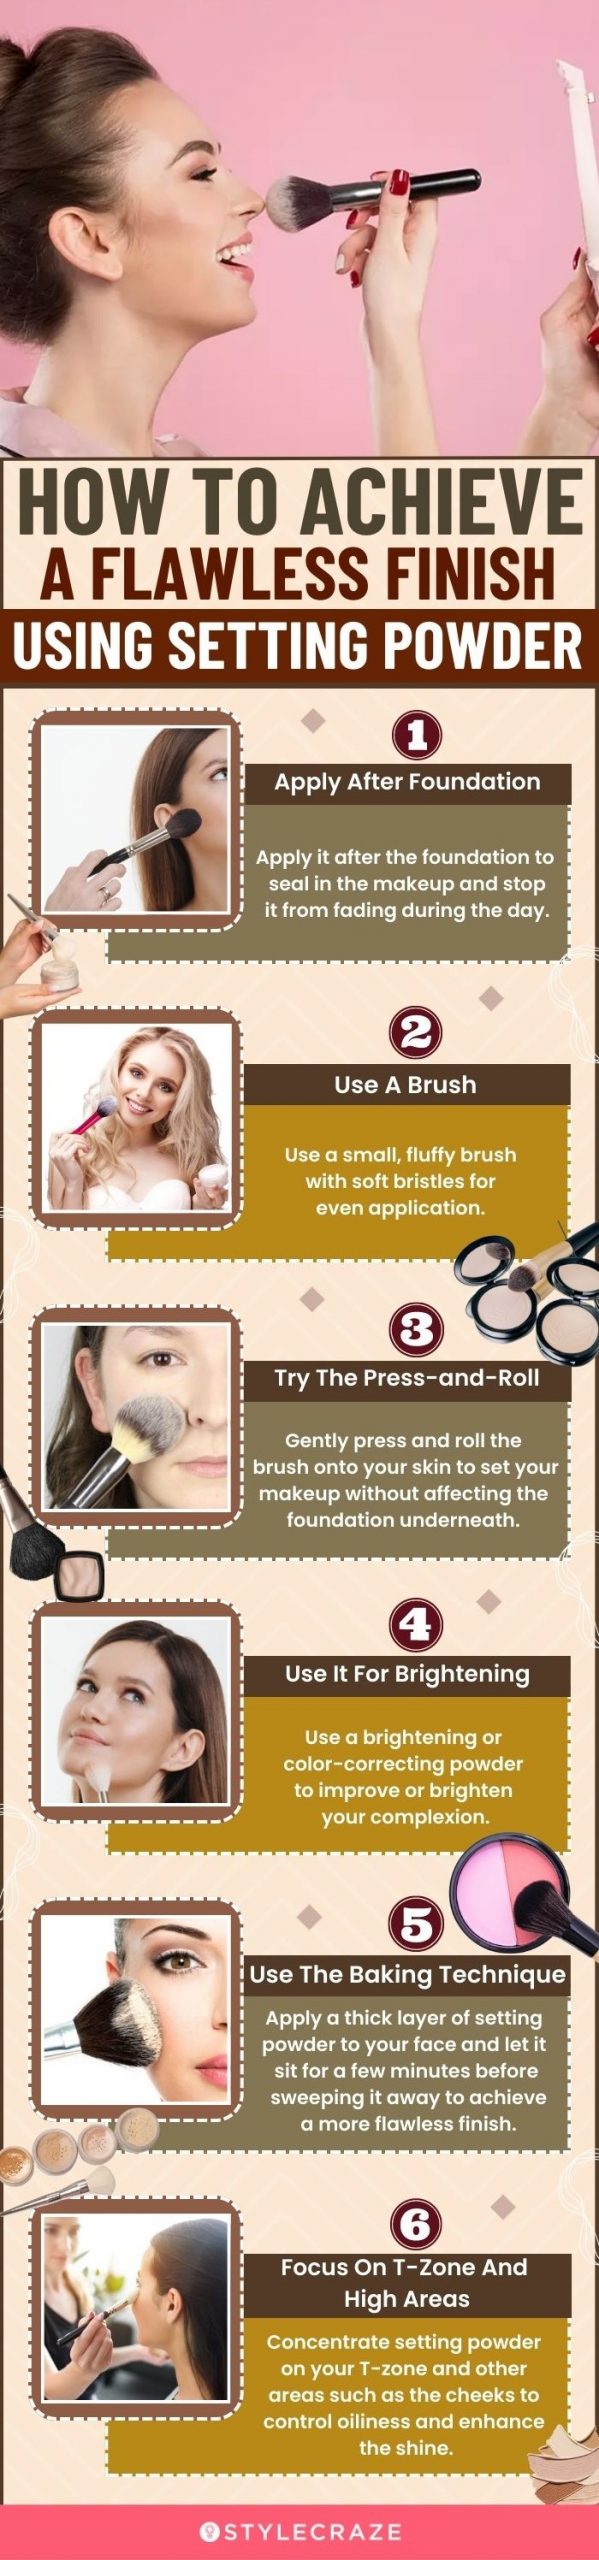 How To Achieve A Flawless Finish Using A Setting Powder (infographic)